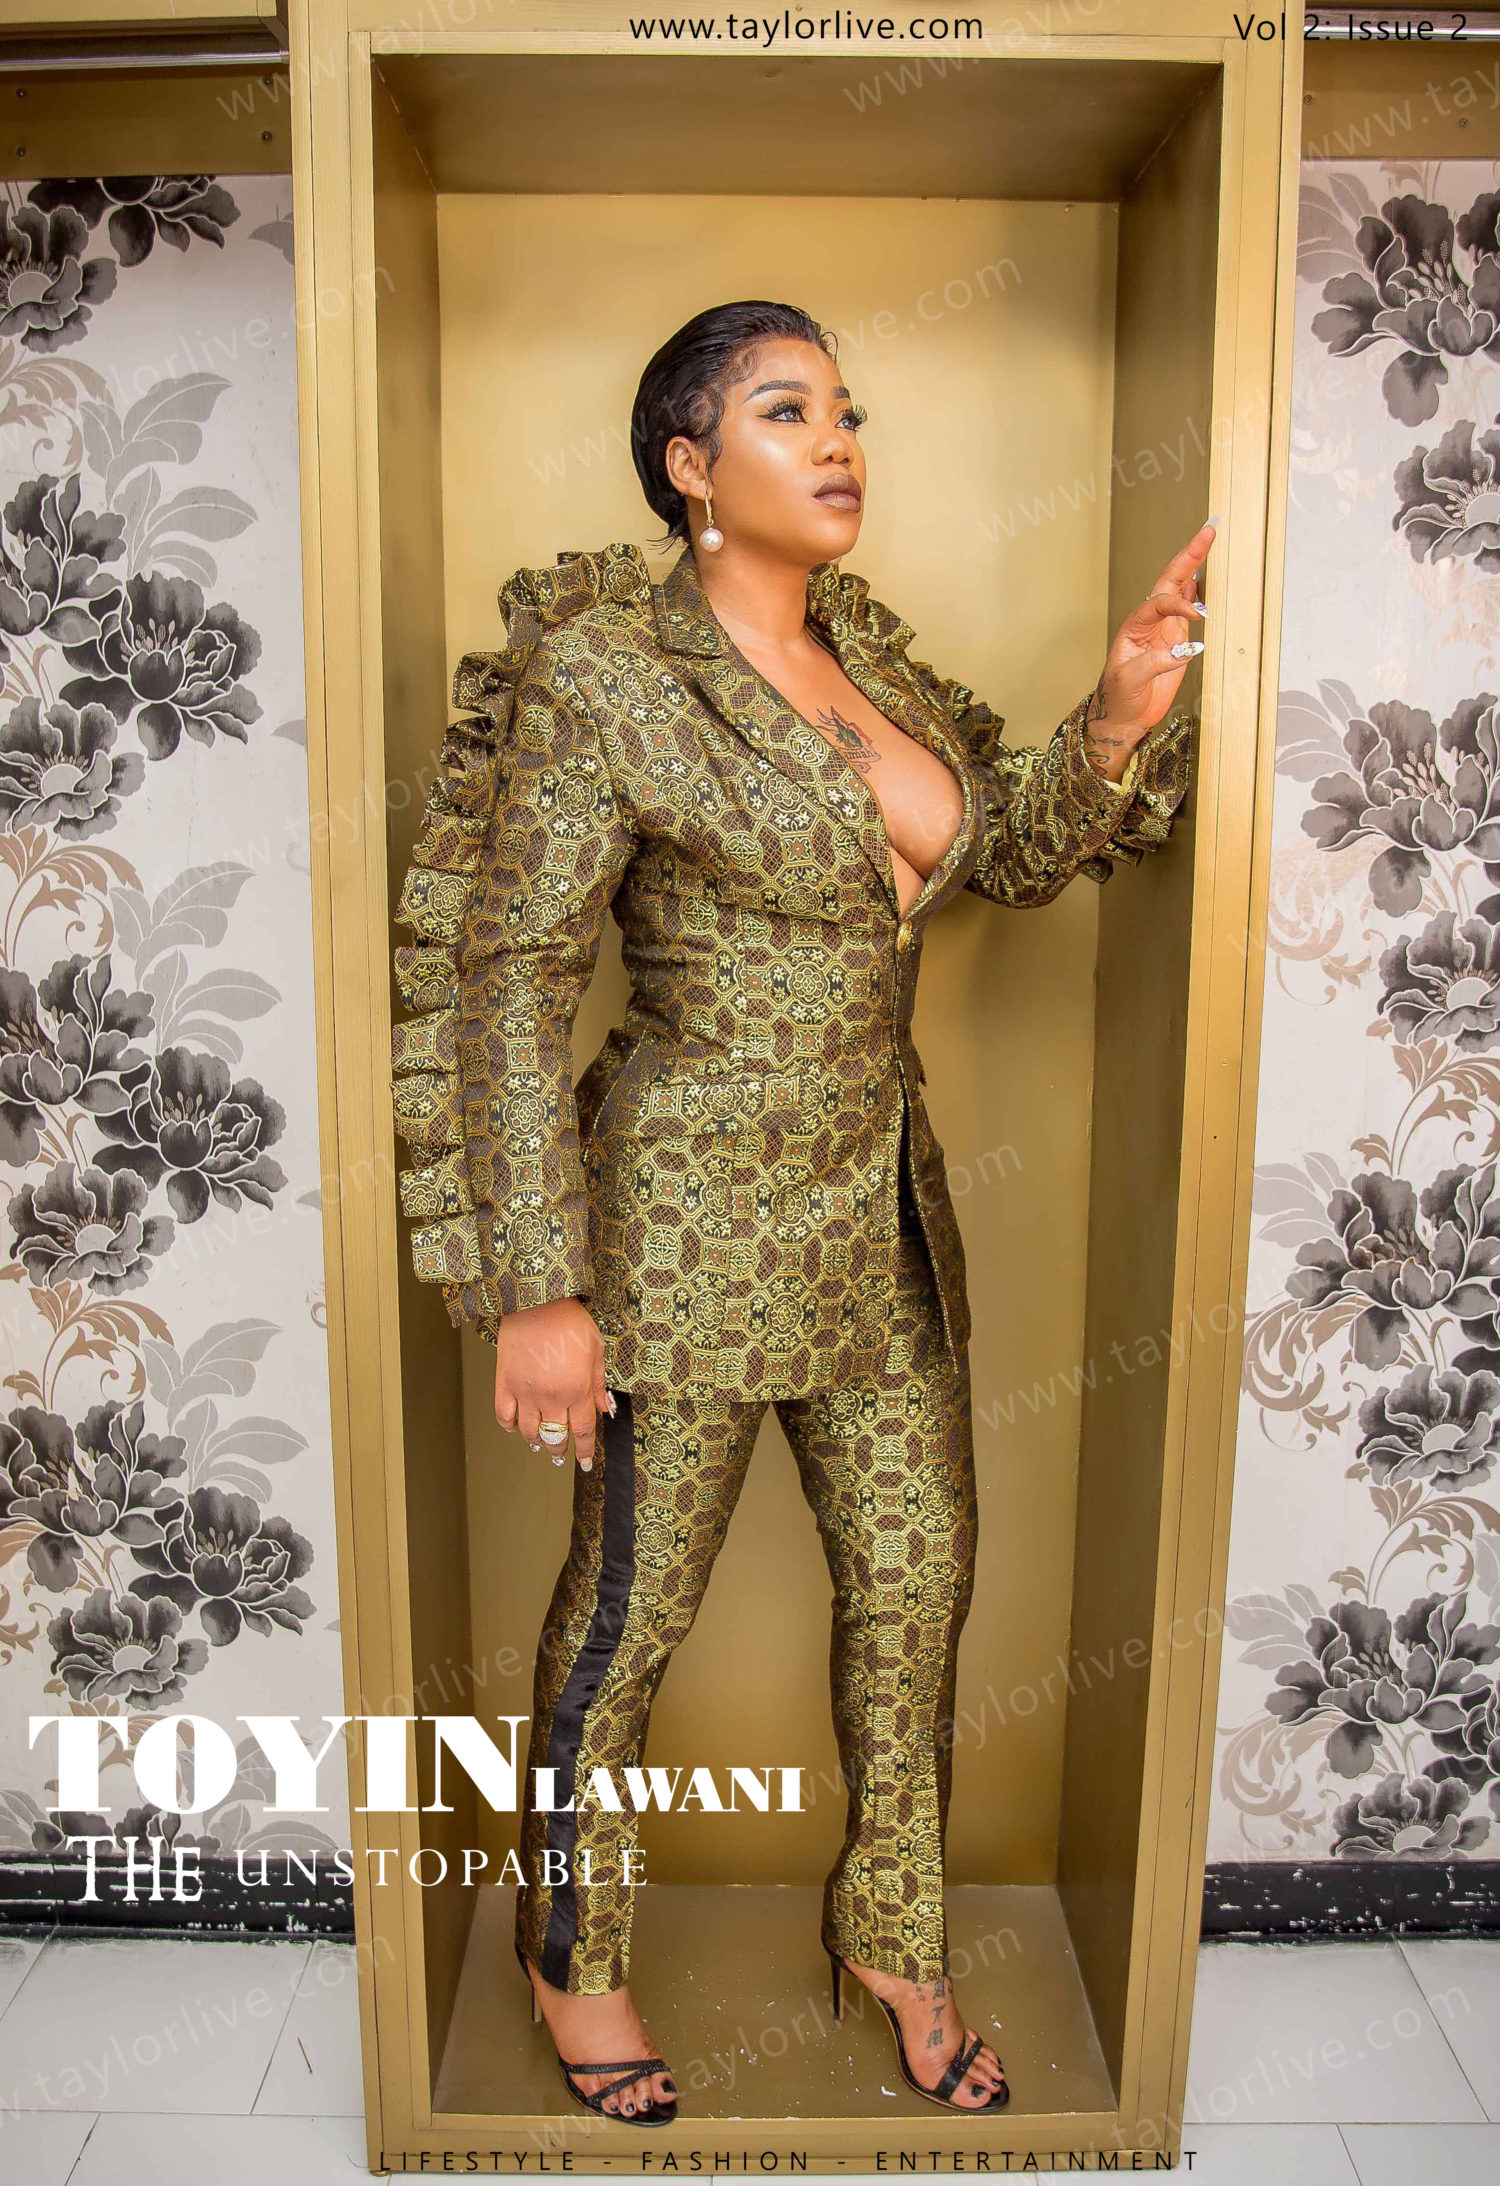 Toyin Lawani Is Fierce On The Cover Of Taylor Live Magazine’s Latest Issue!